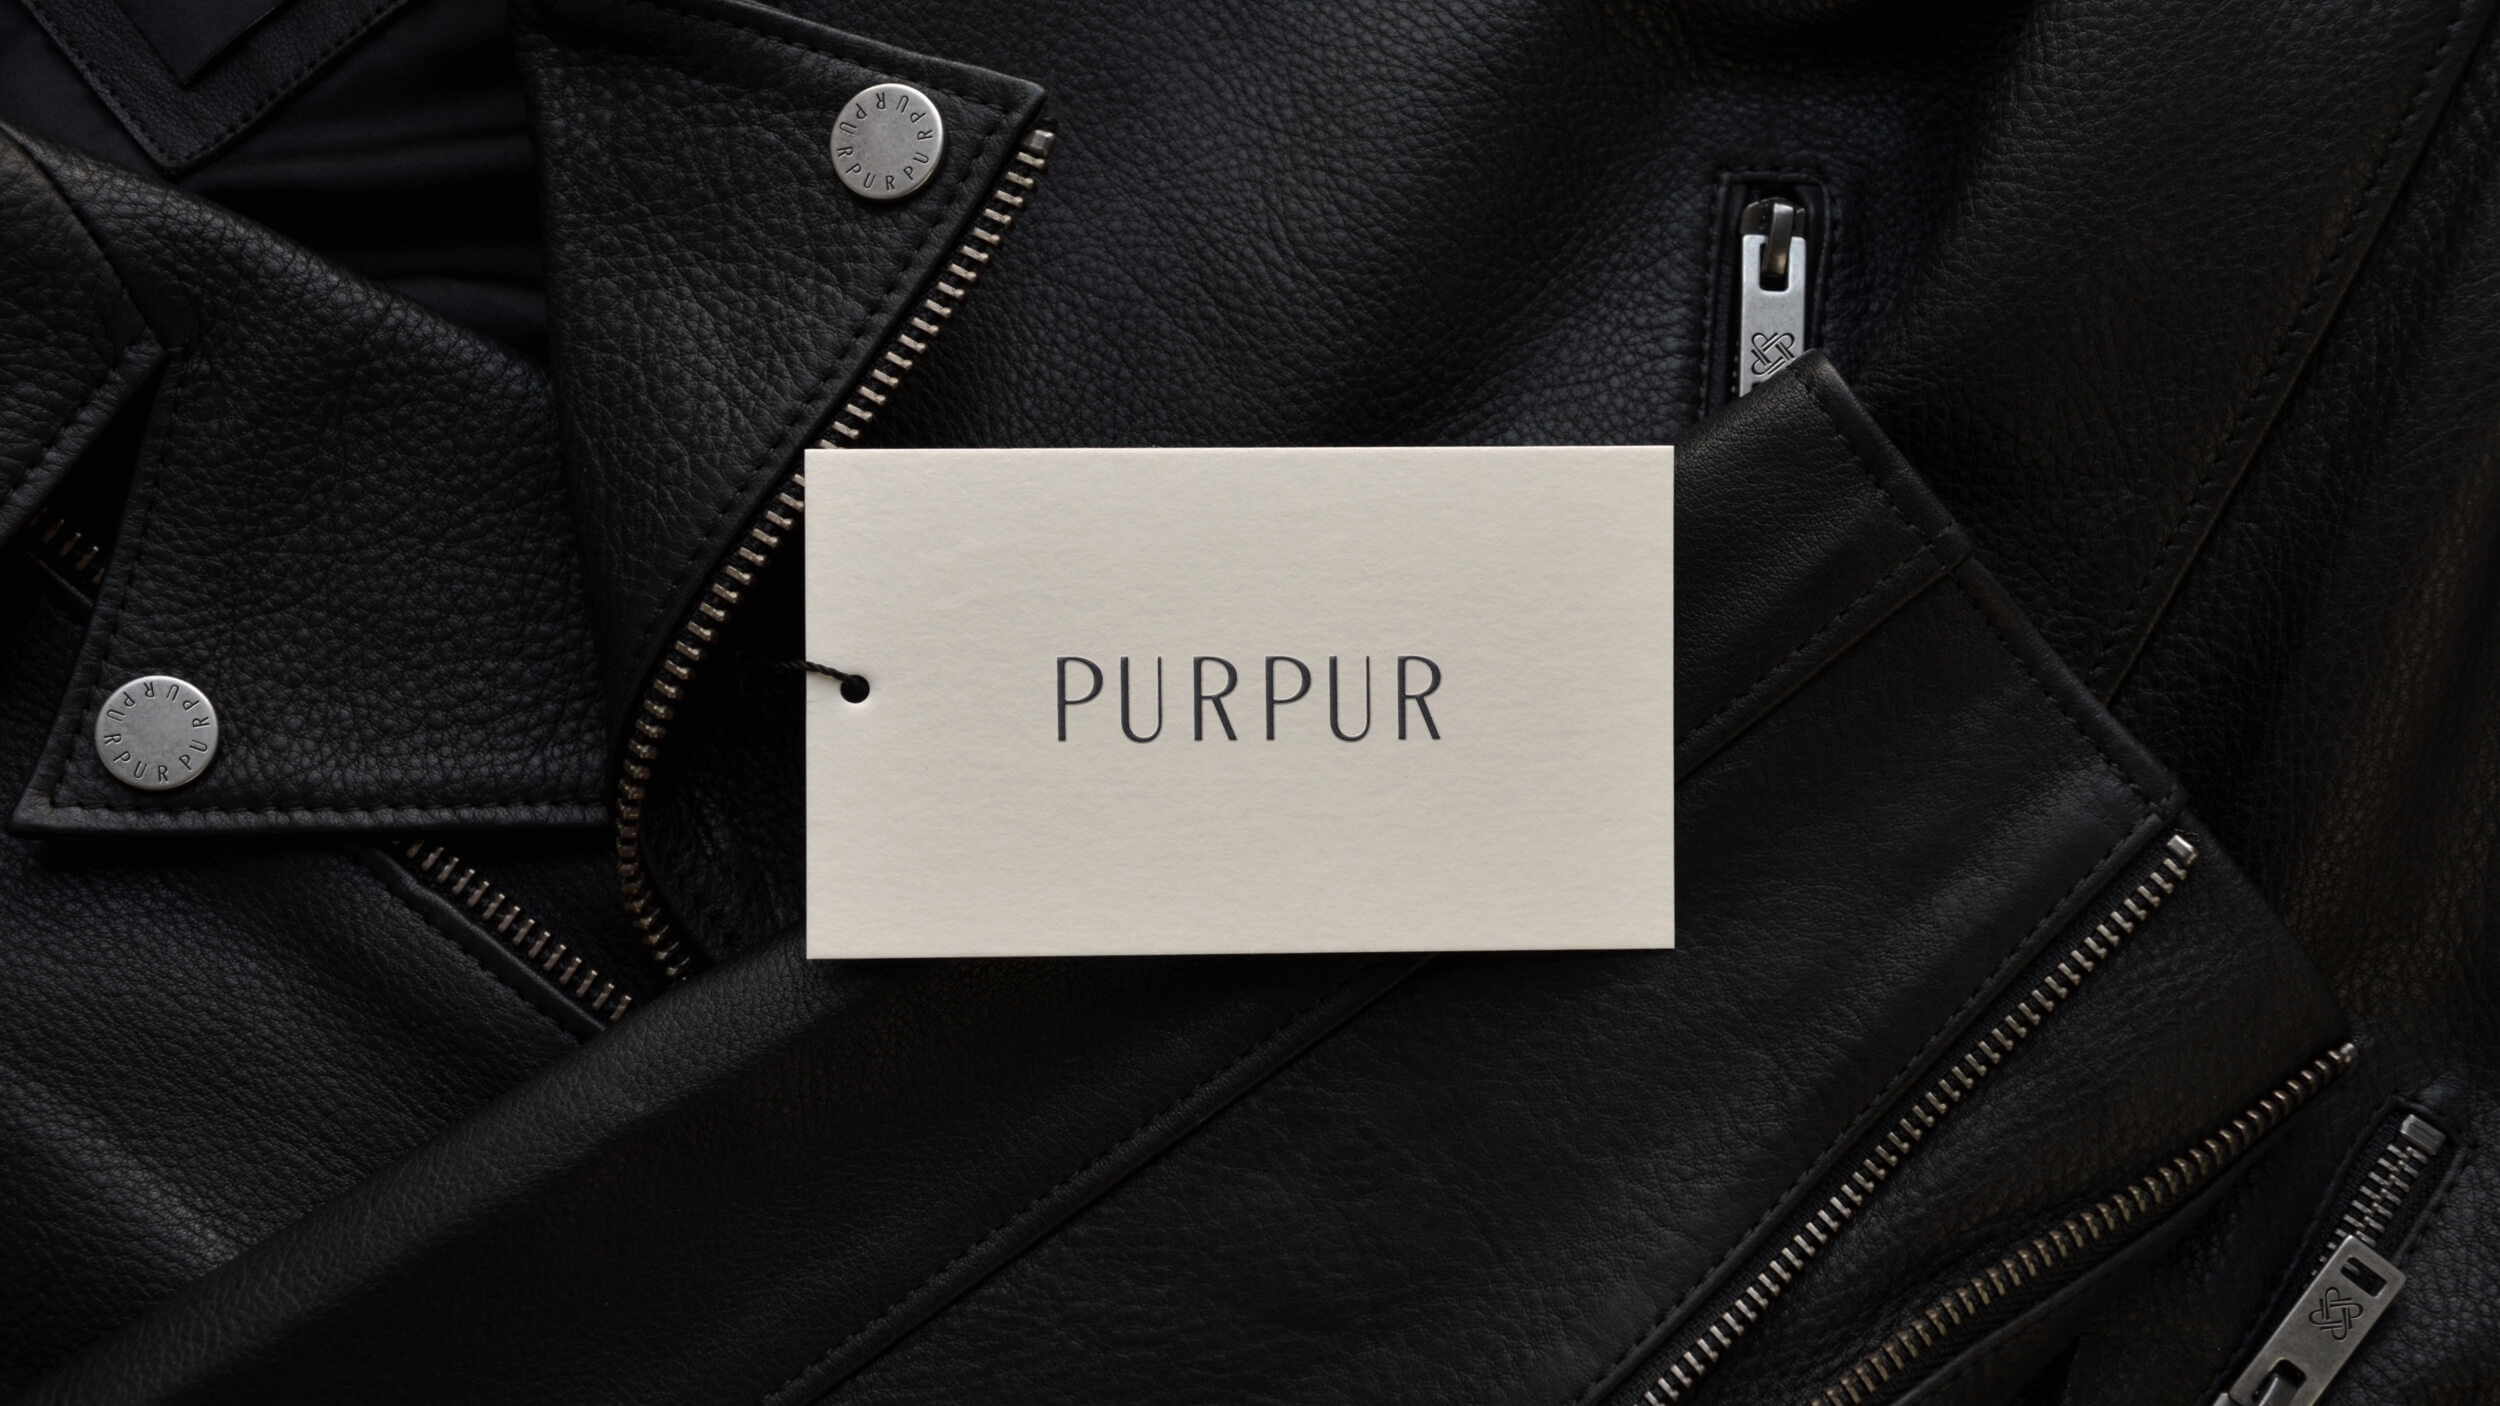 Leather Color: Ohmybrand Agency Developed the Identity of Purpur Outerwear Brand